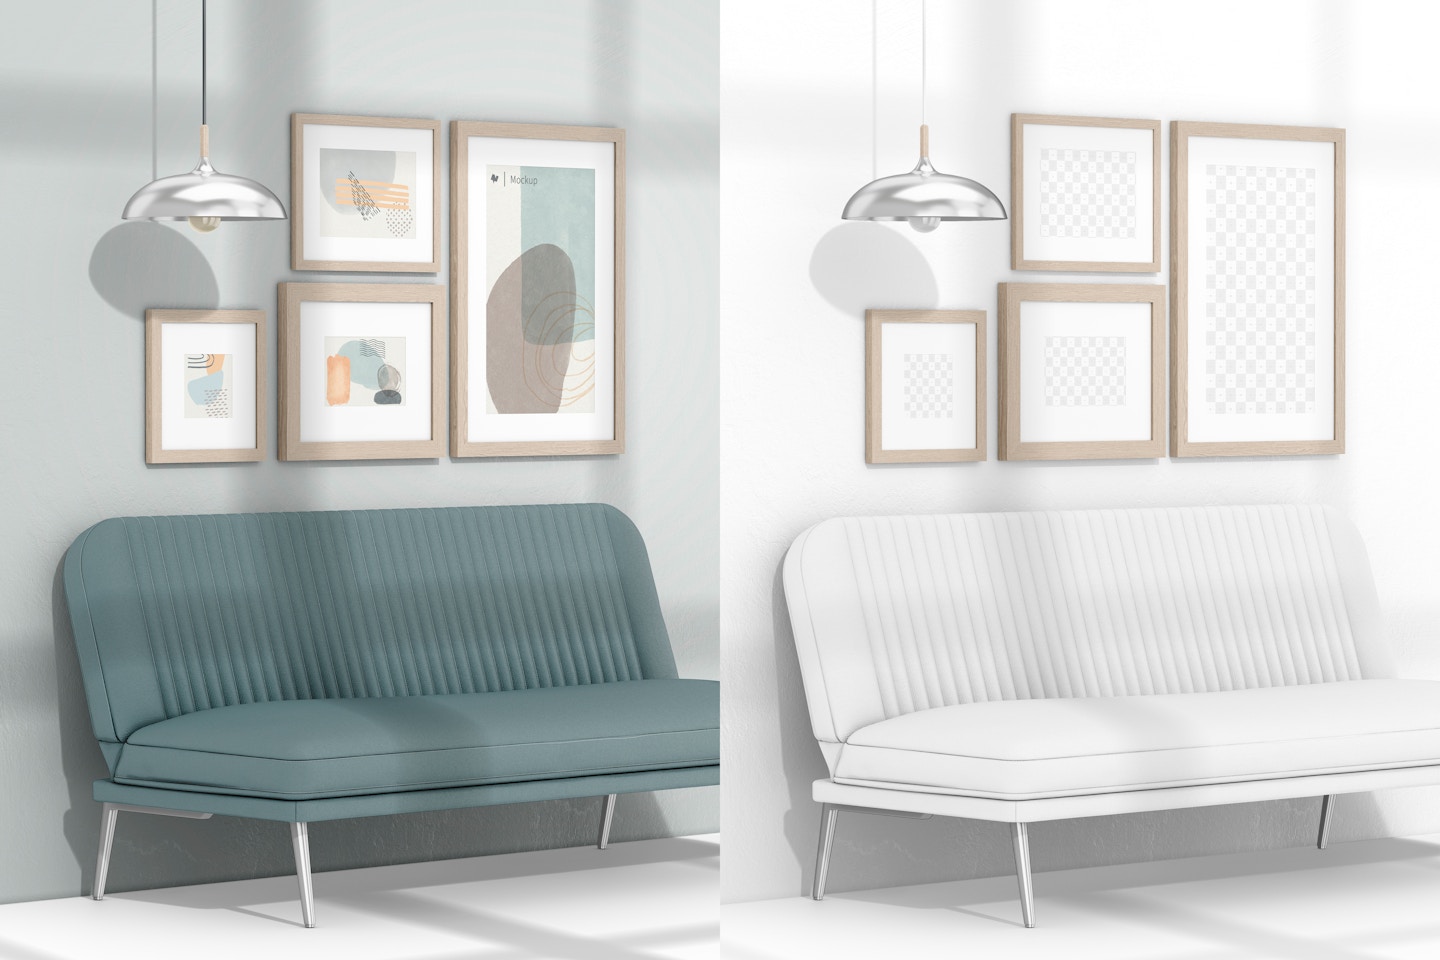 Gallery Frames with Sofa Bed Mockup, Perspective